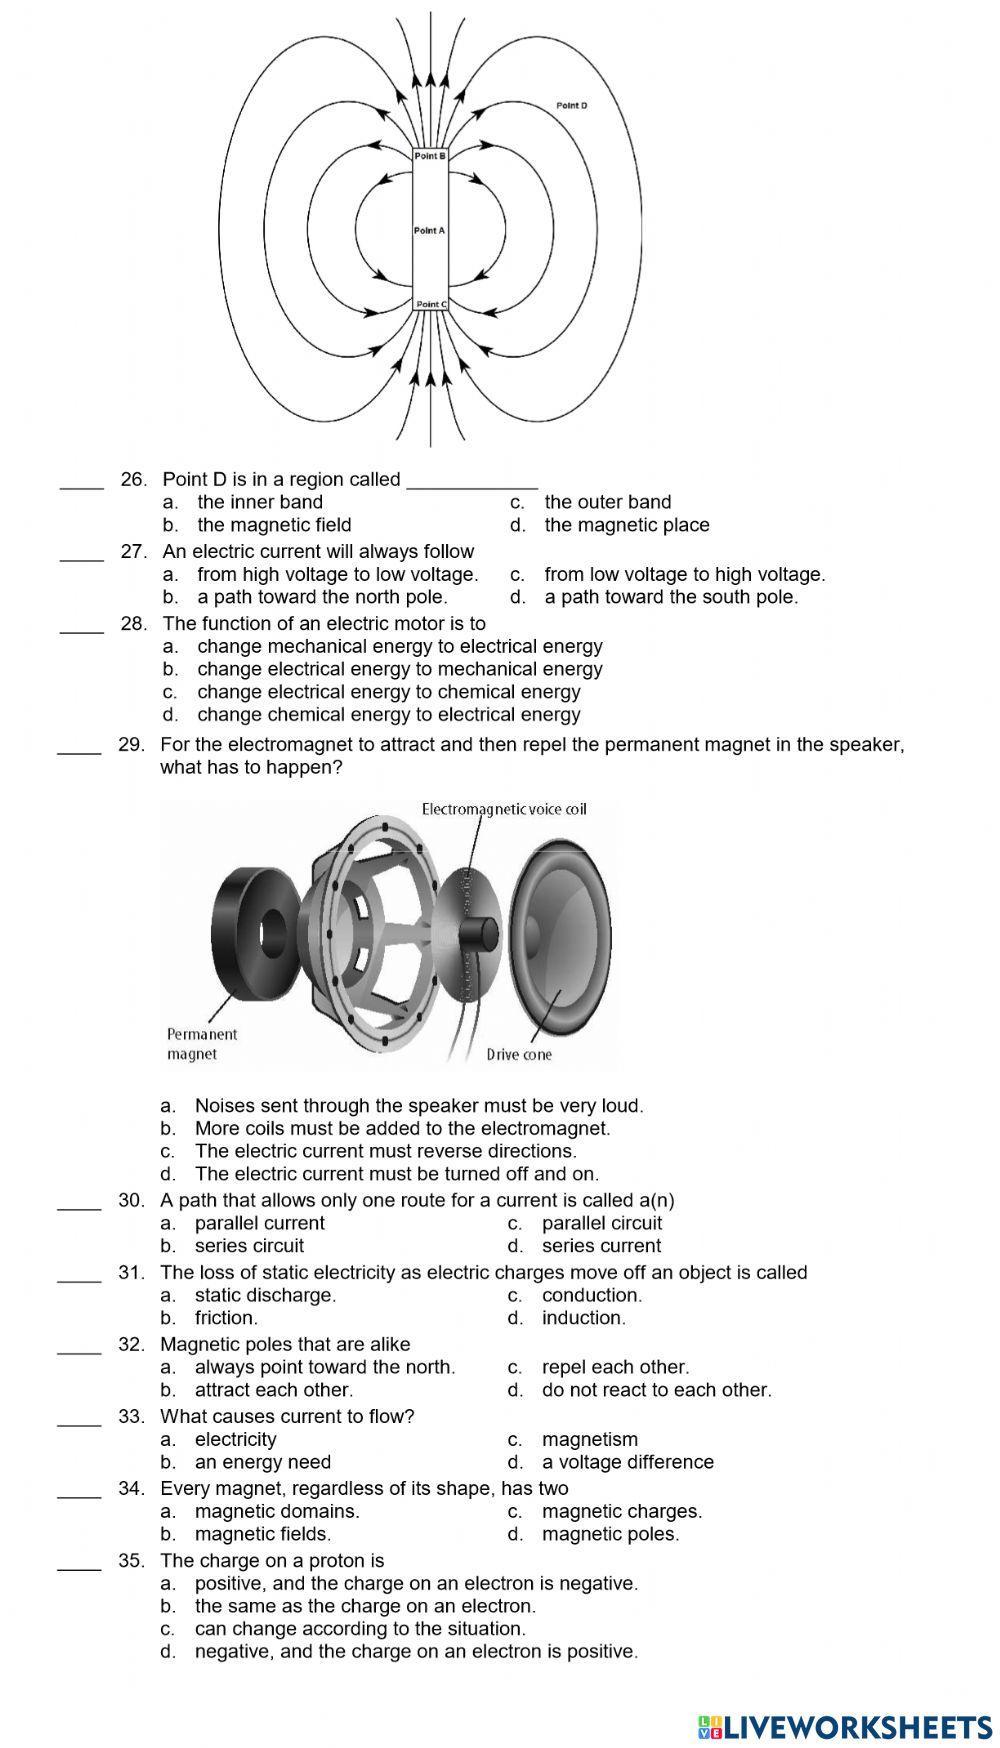 PS-17-16-Electricity and Magnetism Study Guide page 4